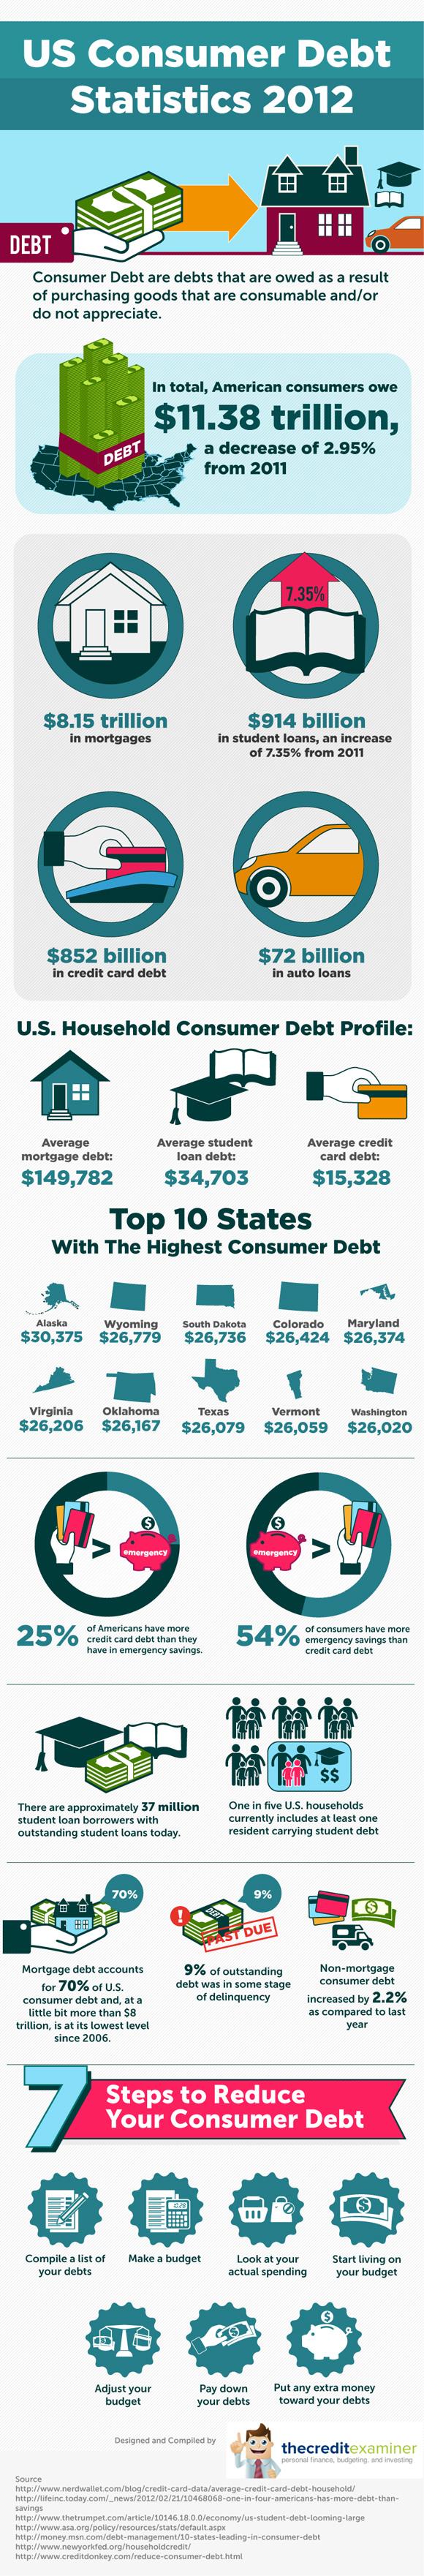 Infographic on US Consumer Debt in America